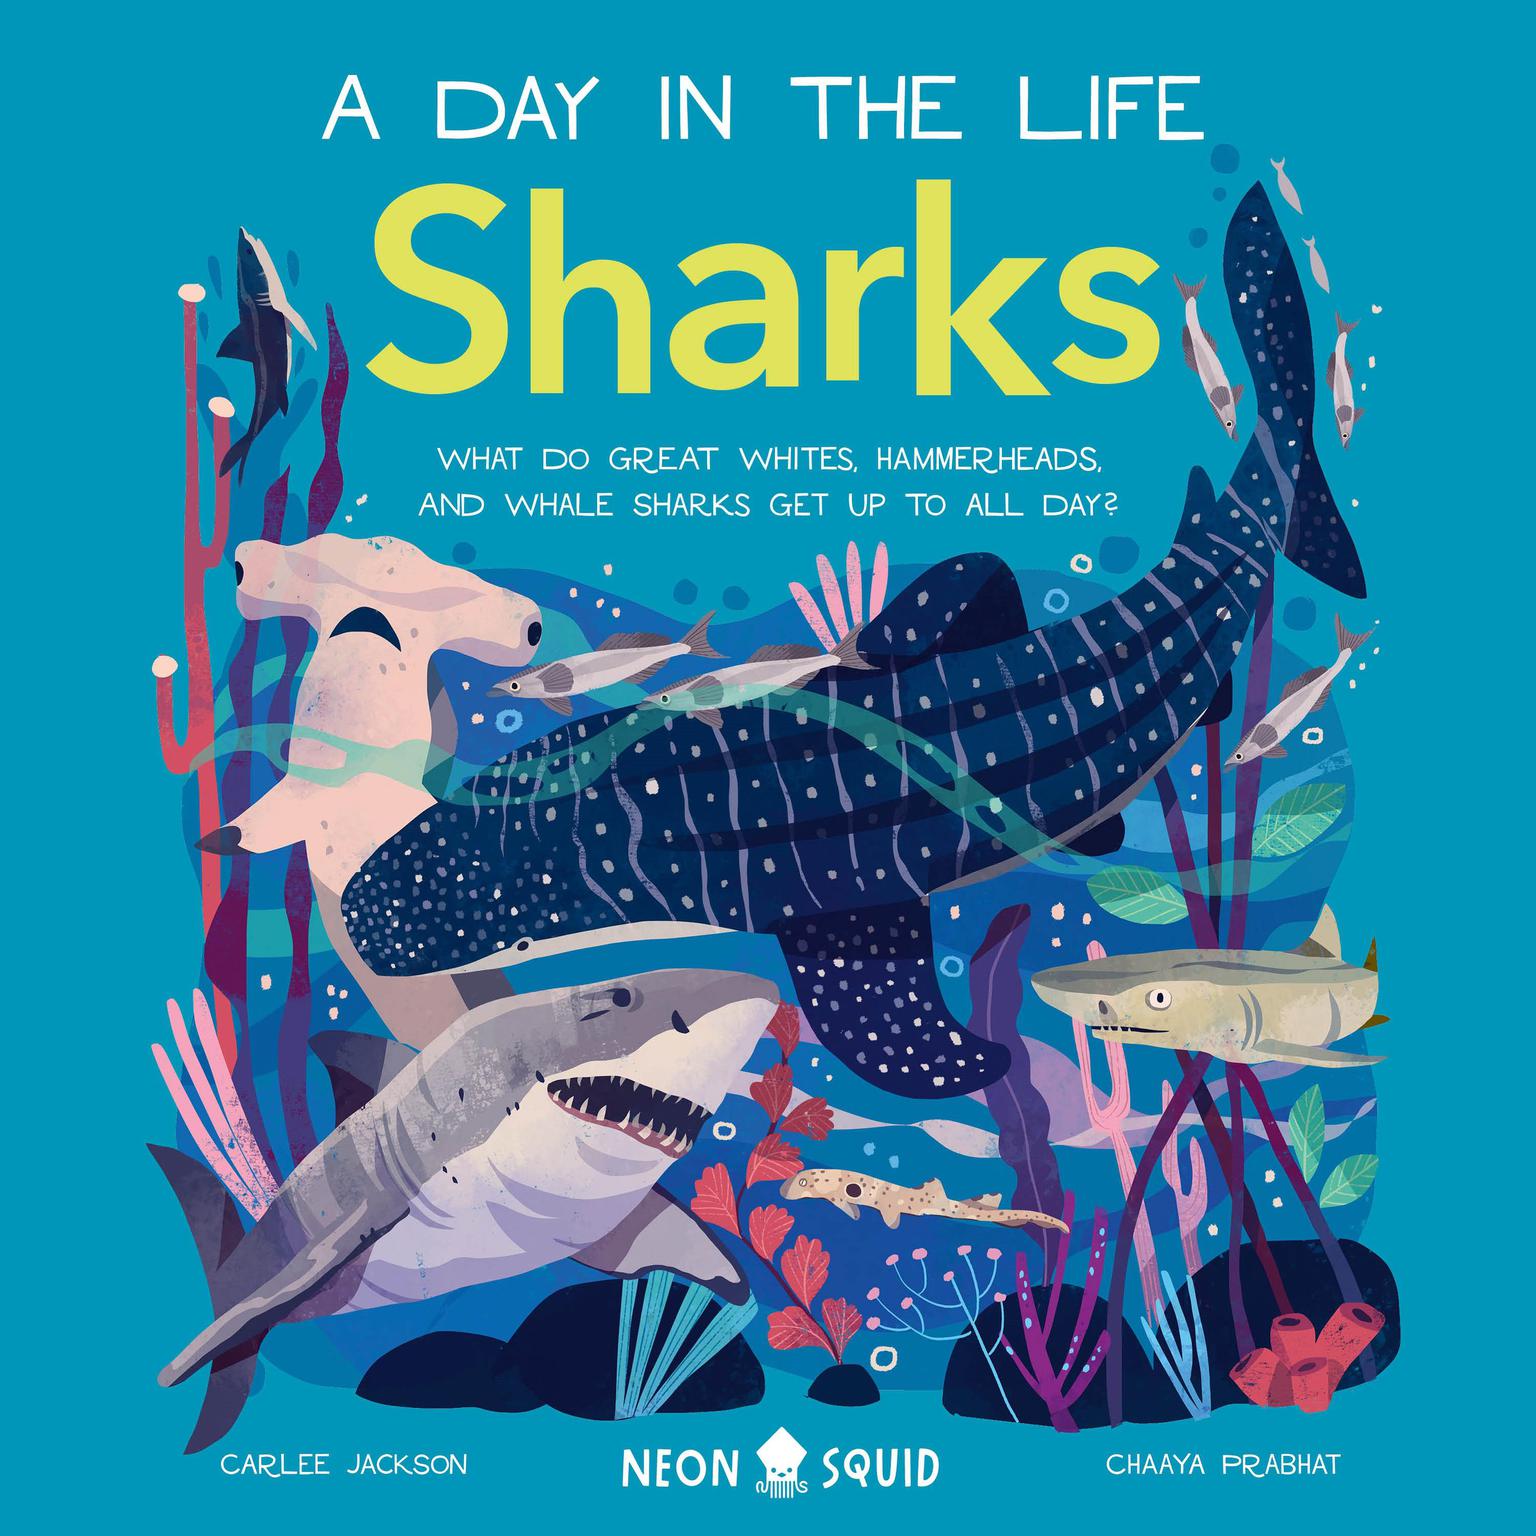 Sharks (A Day in the Life): What Do Great Whites, Hammerheads, and Whale Sharks Get Up To All Day? Audiobook, by Carlee Jackson